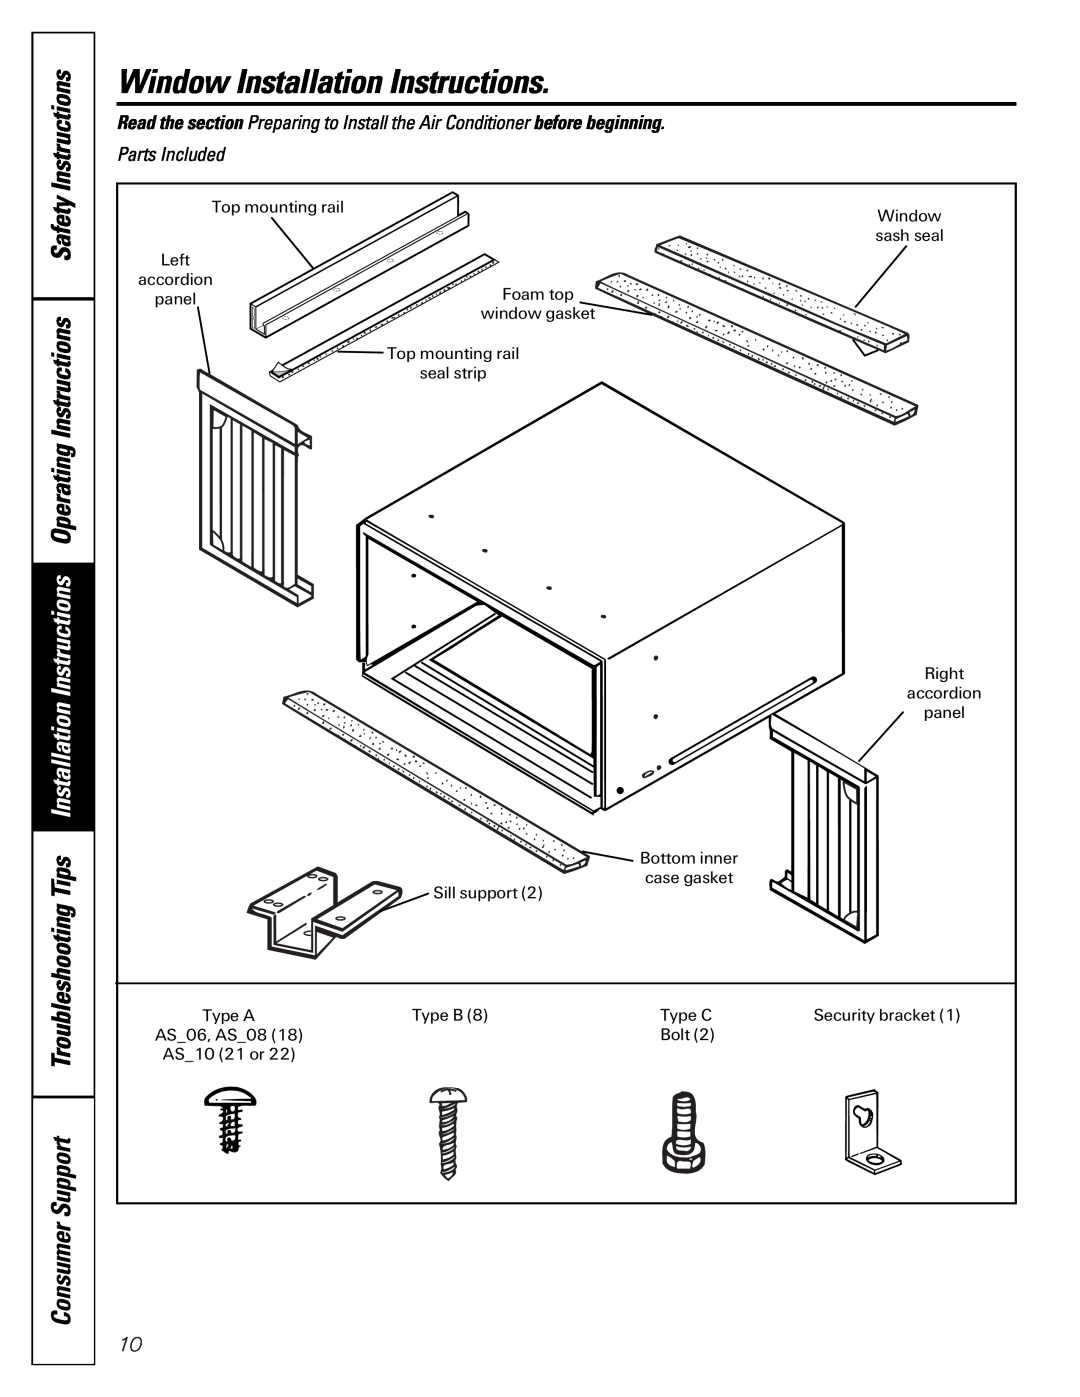 GE AST08, ASP08, ASP10, 49-7400 operating instructions Window Installation Instructions, Parts Included 